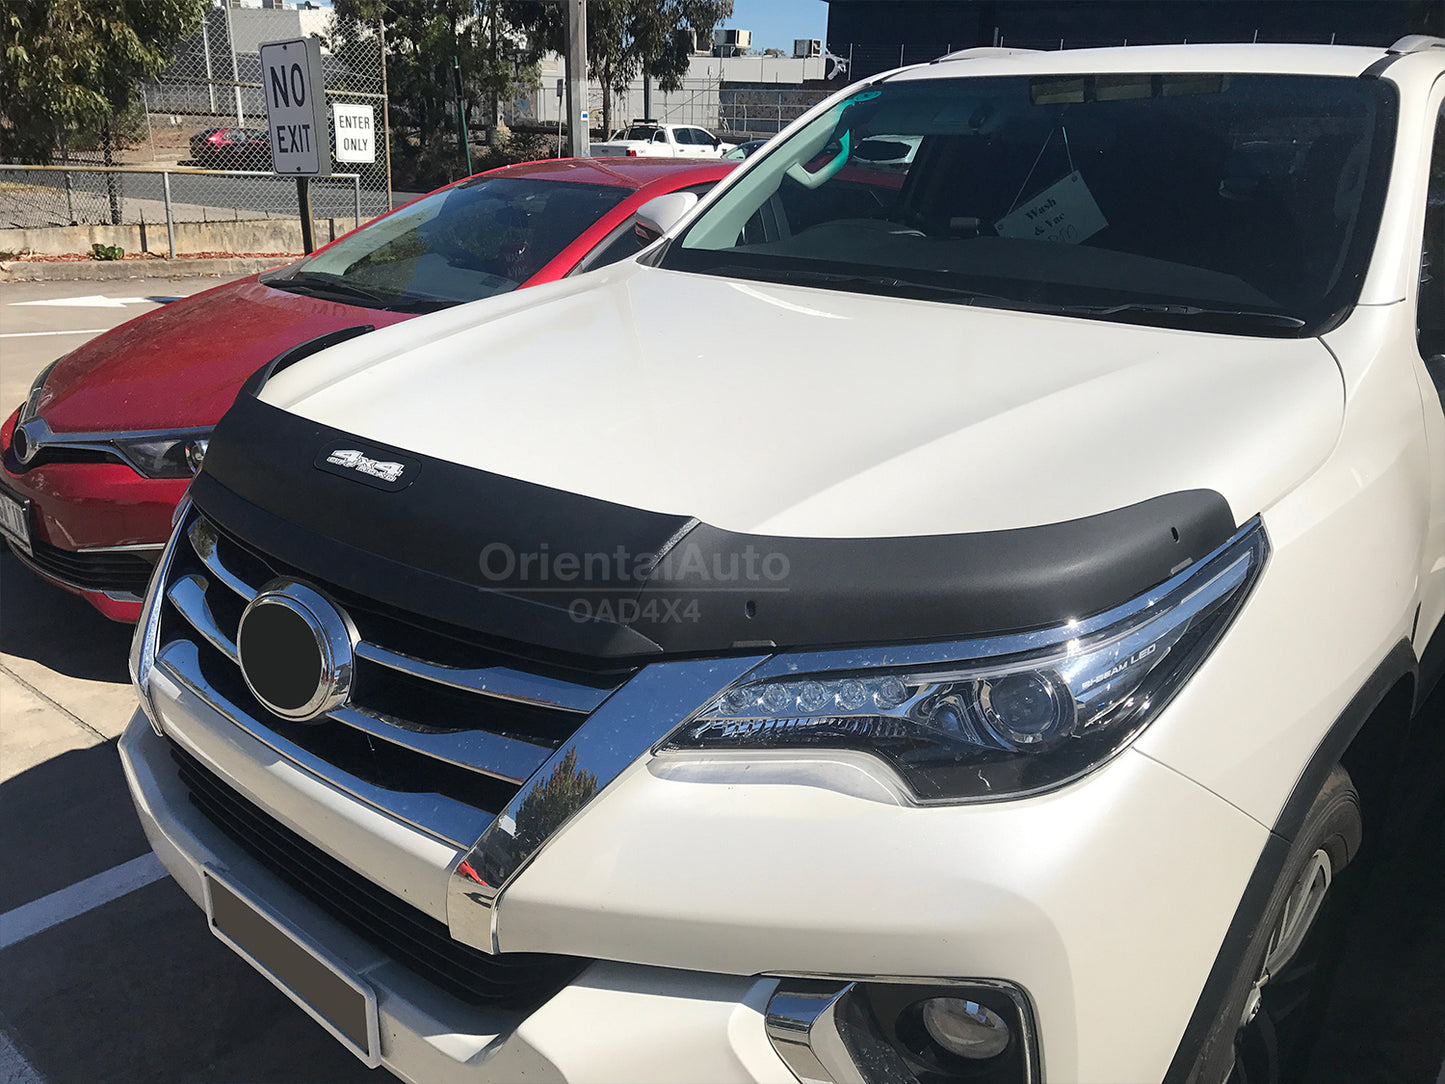 Injection Modeling Bonnet Protector & Injection Weathershield for Toyota Fortuner 2015-2020 Weather Shields Window Visor Hood Protector Bonnet Guard